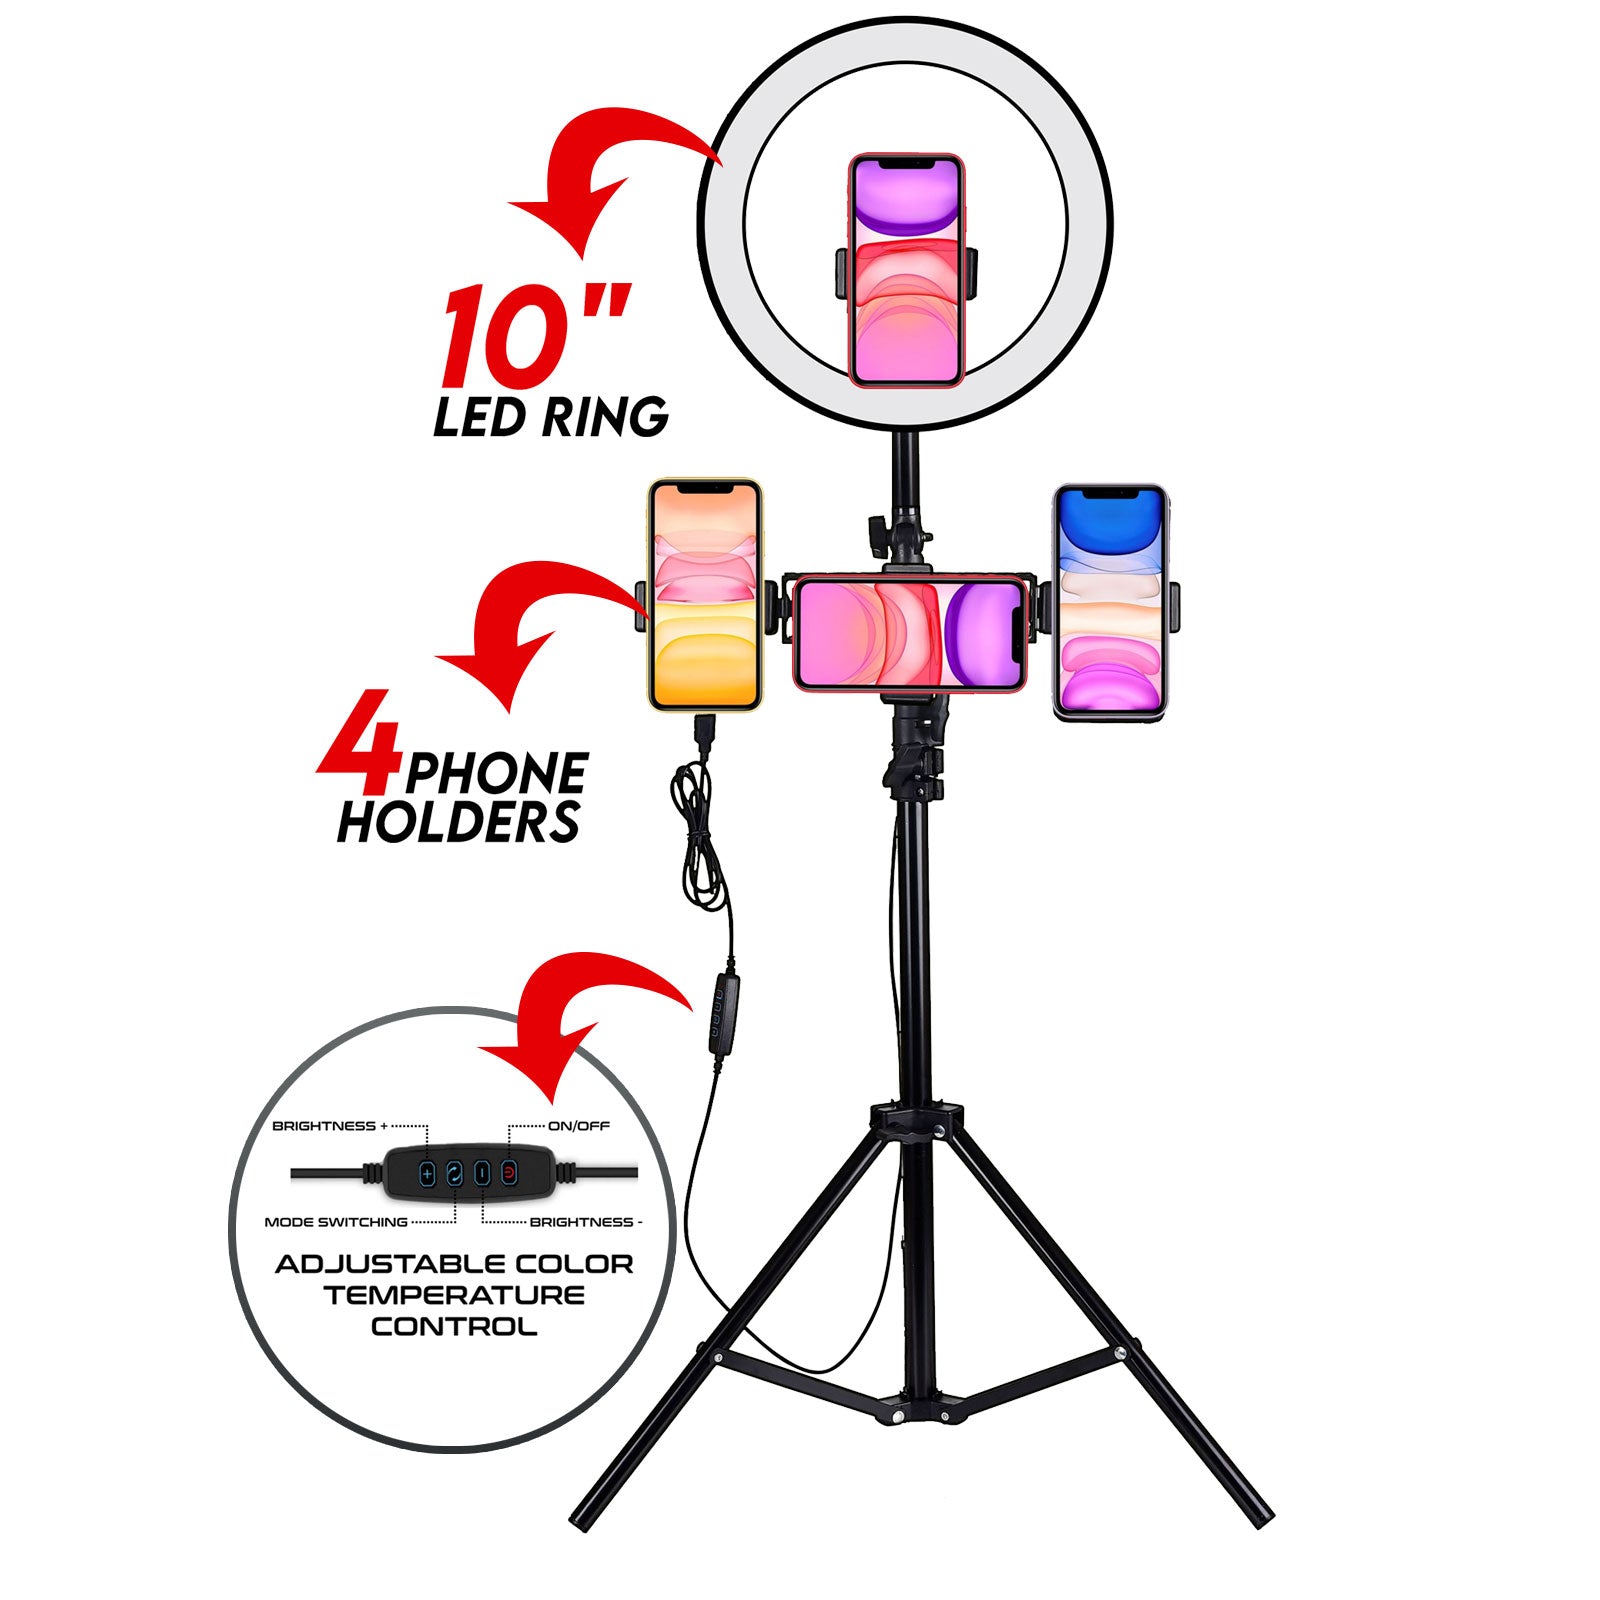 Blastking IP-LED Ring Influencer Stand and LED